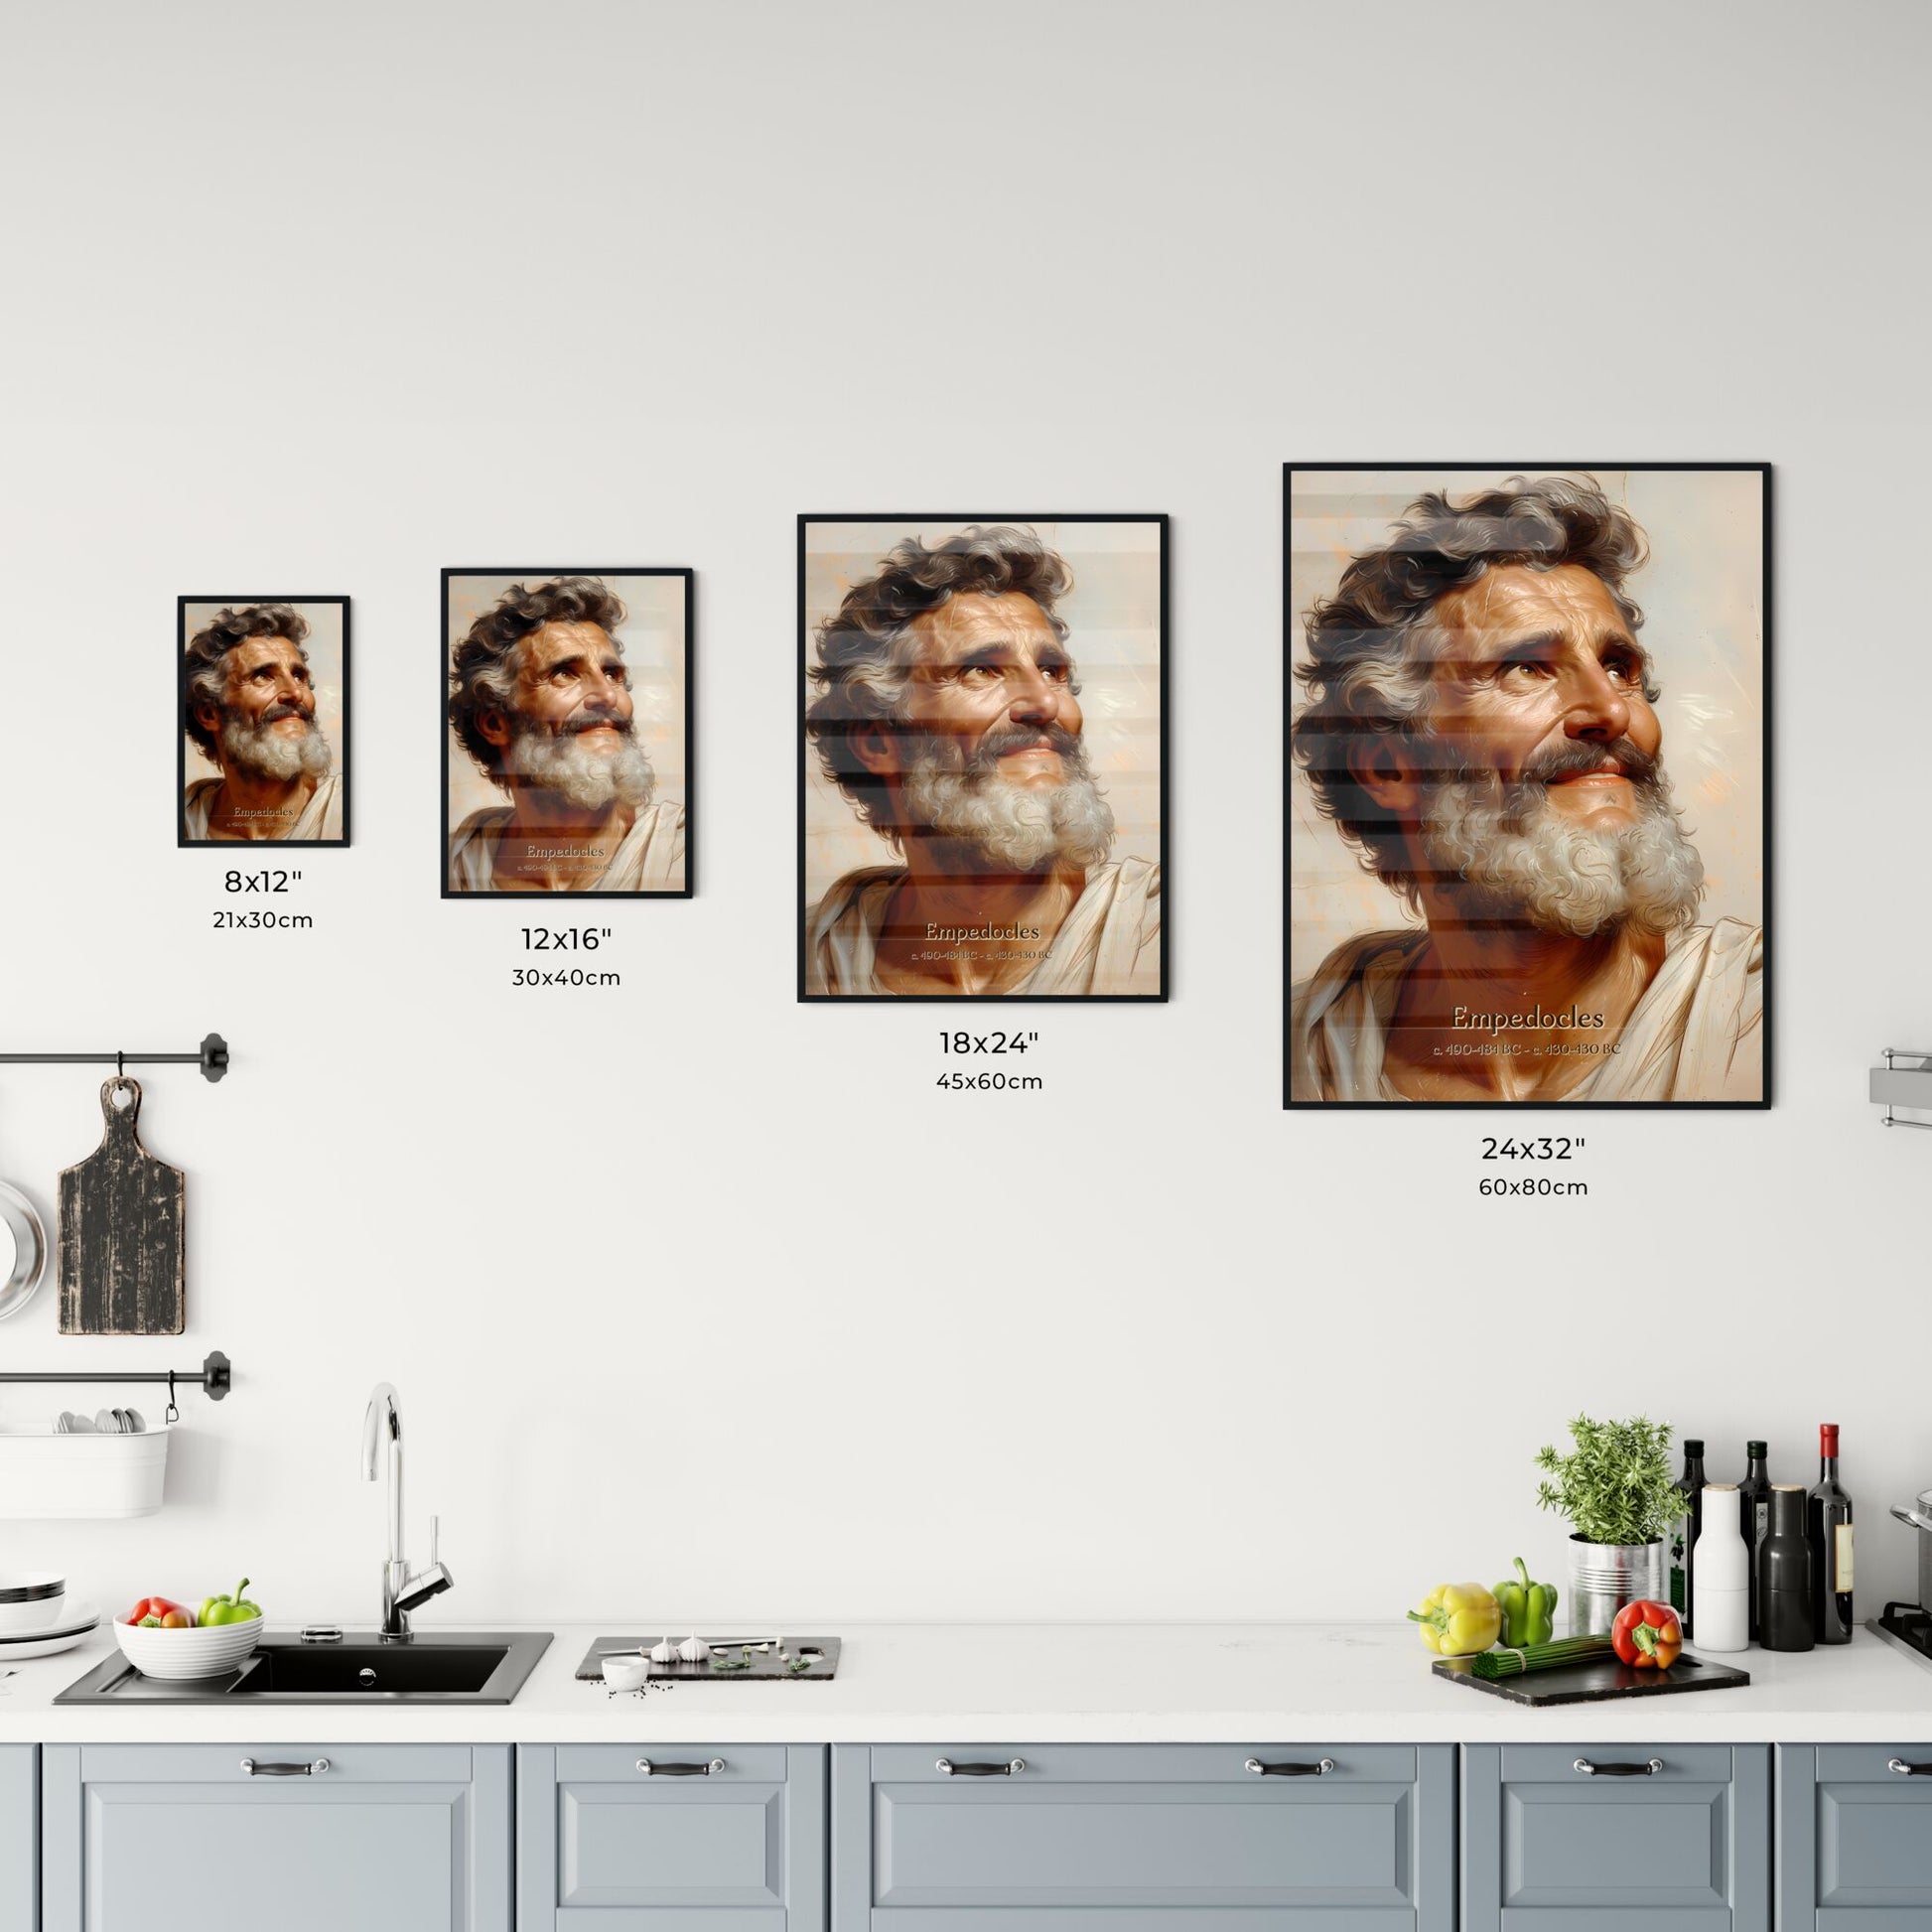 Empedocles, c. 490-484 BC - c. 430-430 BC, A Poster of a man with a beard looking up Default Title